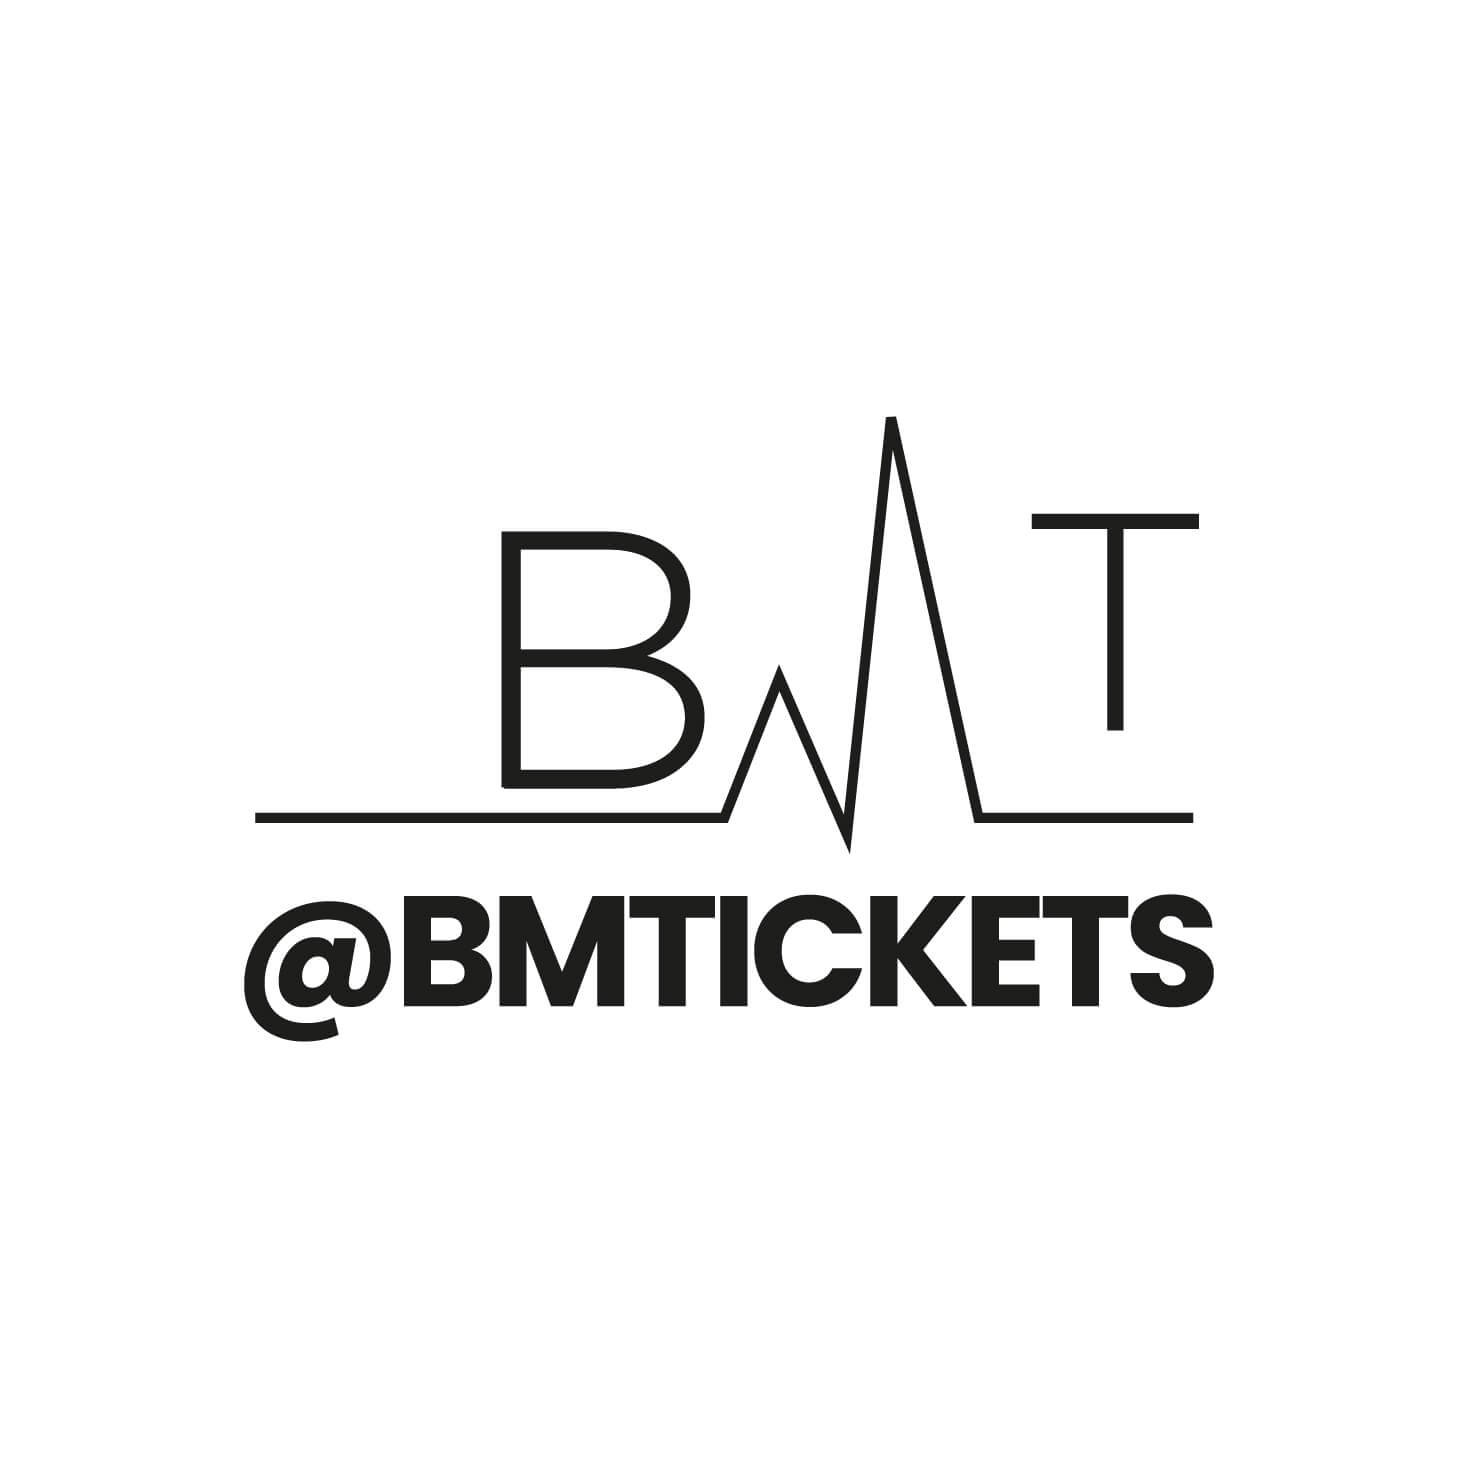 BMTickets